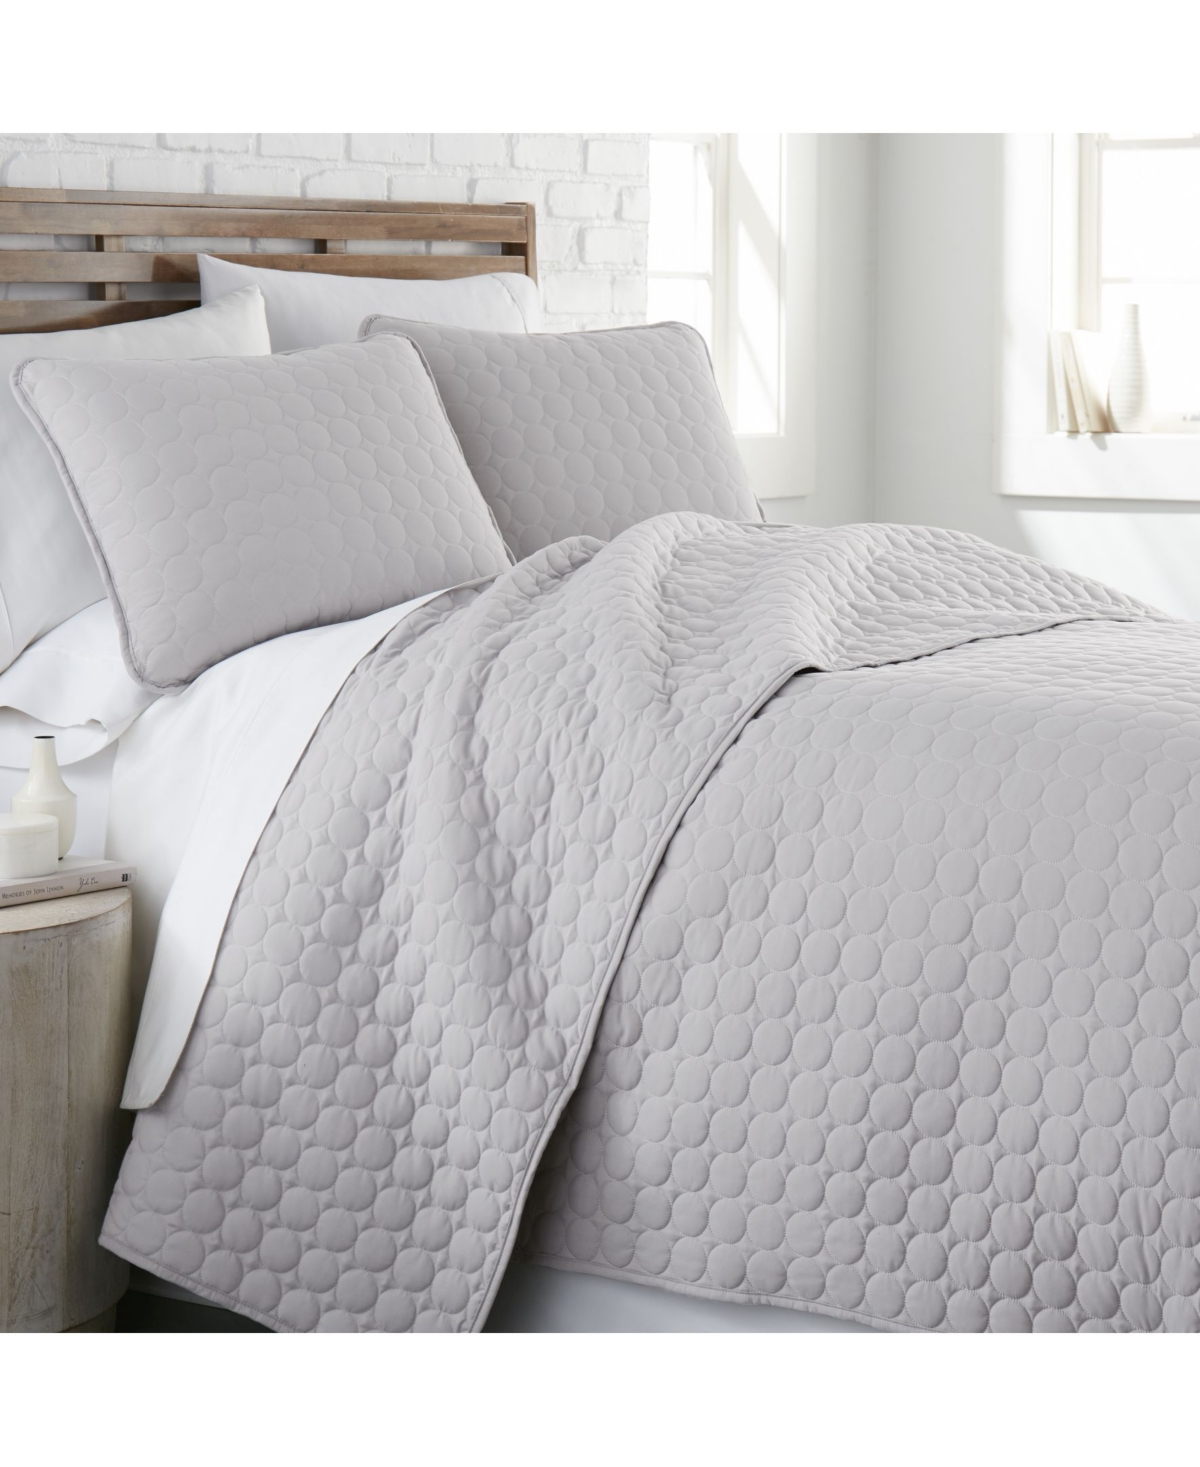 Southshore Fine Linens Ultra-soft Lightweight 3-piece Quilt And Sham Set, Twin/twin Xl In Gray